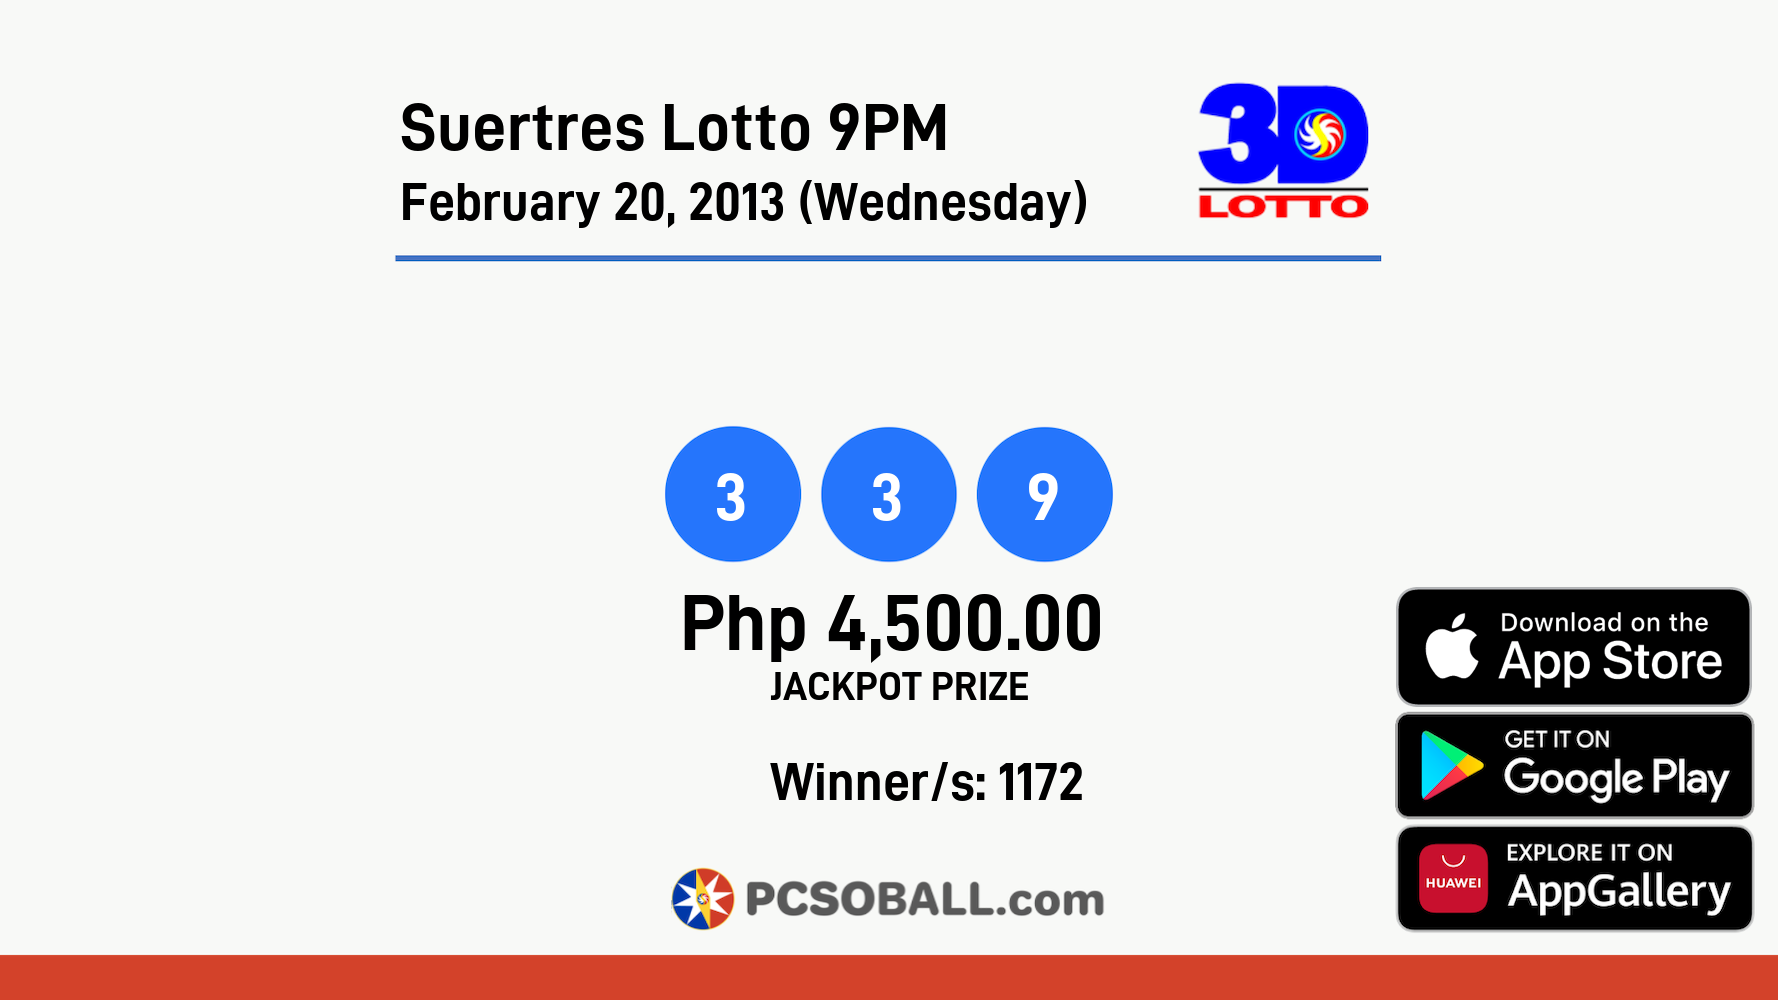 Suertres Lotto 9PM February 20, 2013 (Wednesday) Result